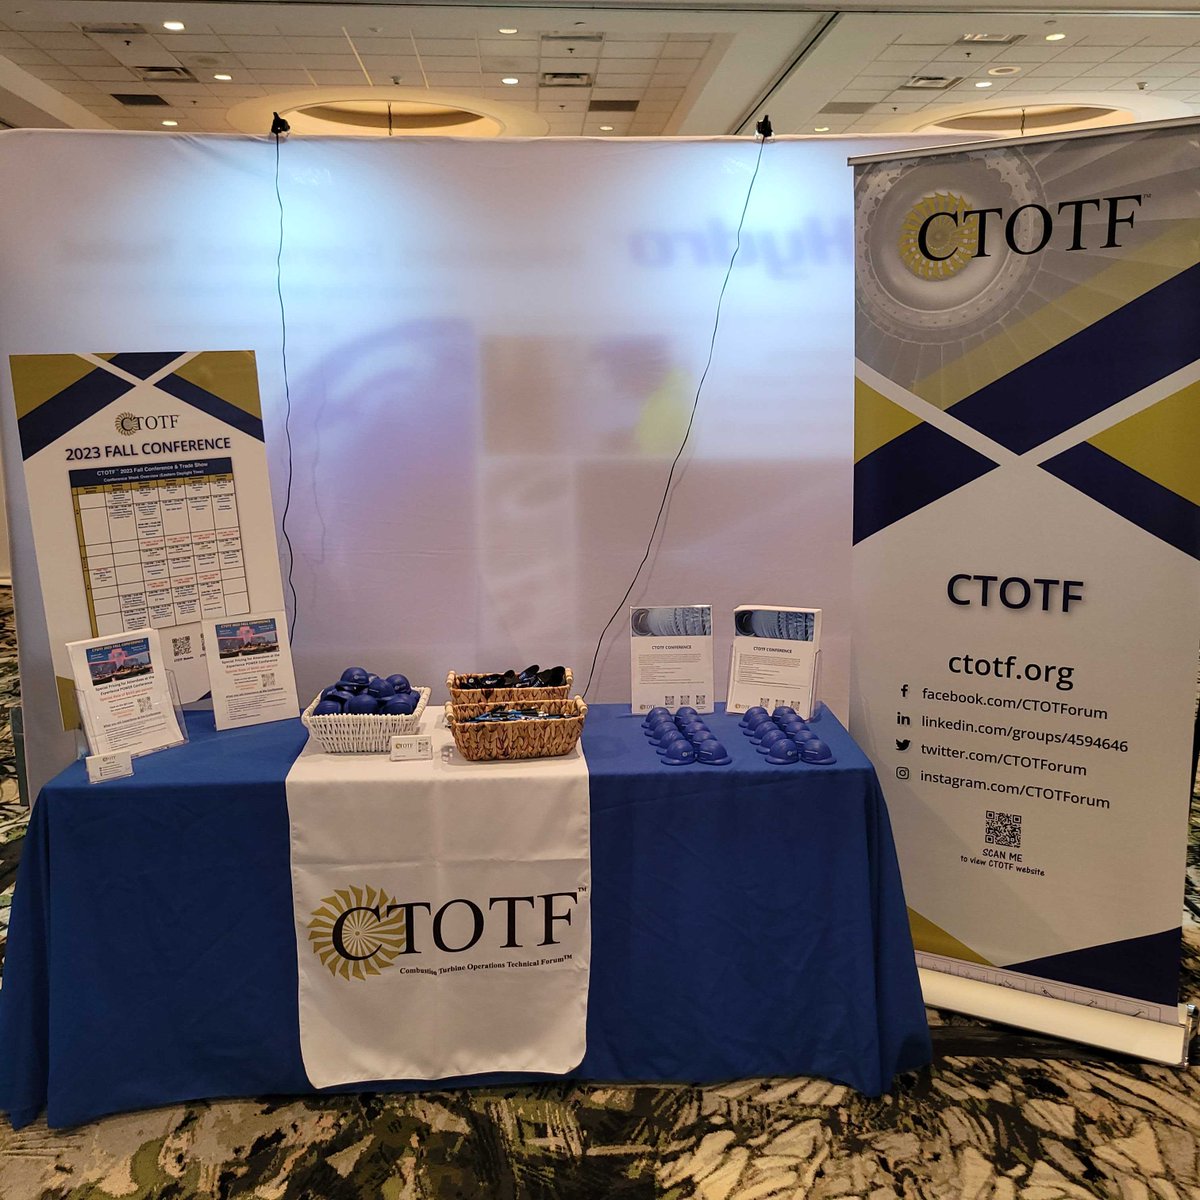 @CTOTForum is excited to be at @POWERmagazine Experience POWER Week in Savannah, GA.  Be sure to stop by and see us at the tradeshow in Booth 108.
#power #powerweek #powerconference #powermagazine #energy #energyconference  #combustionturbines #ctotf